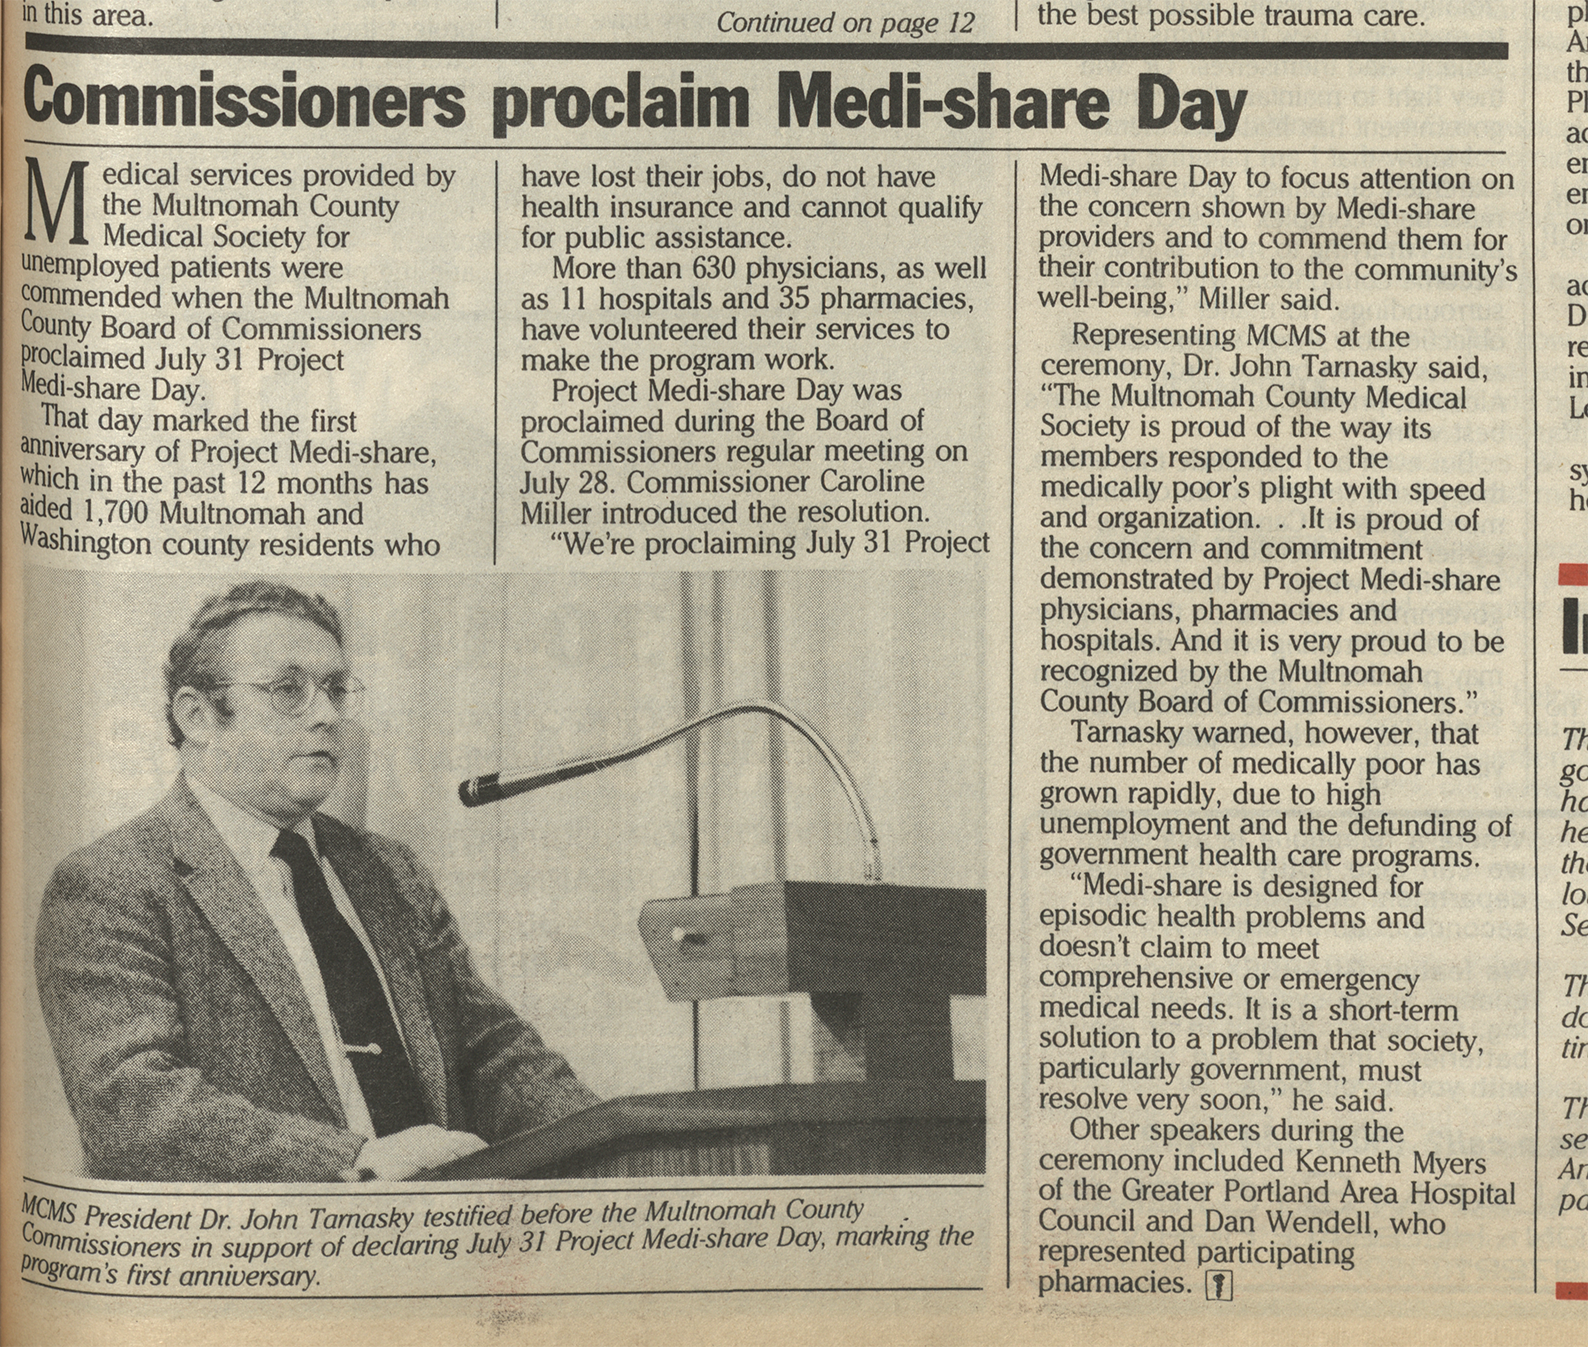 "Commissioners proclaim Medi-share Day" article notes the Multnomah County Commission declared July 31, 1983 as Medi-share Day.